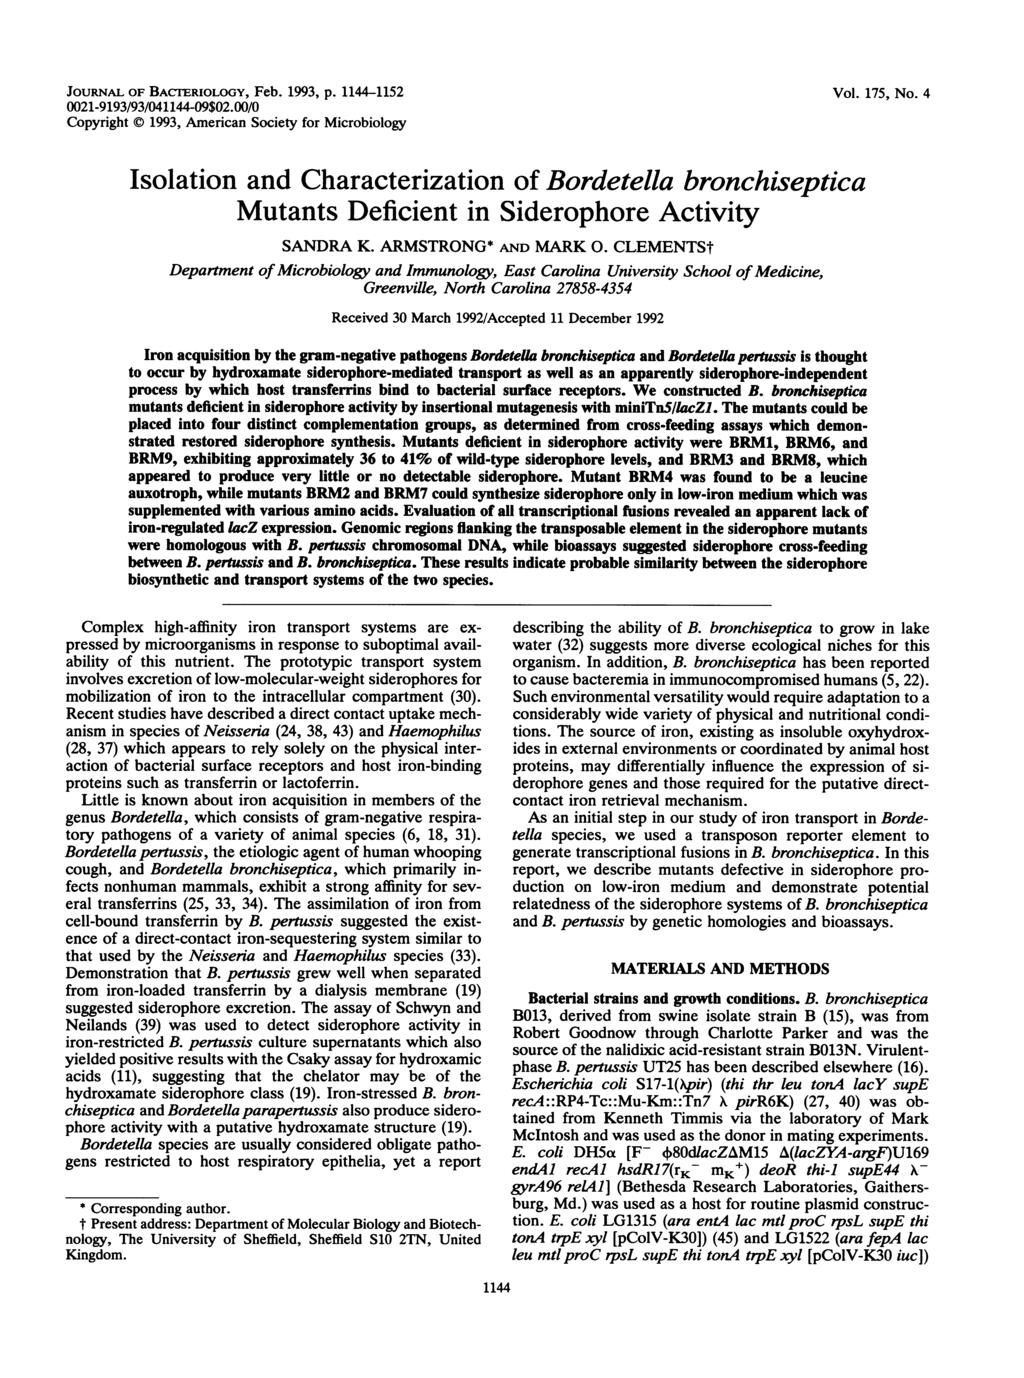 JOURNAL OF BACTERIOLOGY, Feb. 1993, p. 1144-1152 0021-9193/93/041144-09$02.00/0 Copyright X 1993, American Society for Microbiology Vol. 175, No.